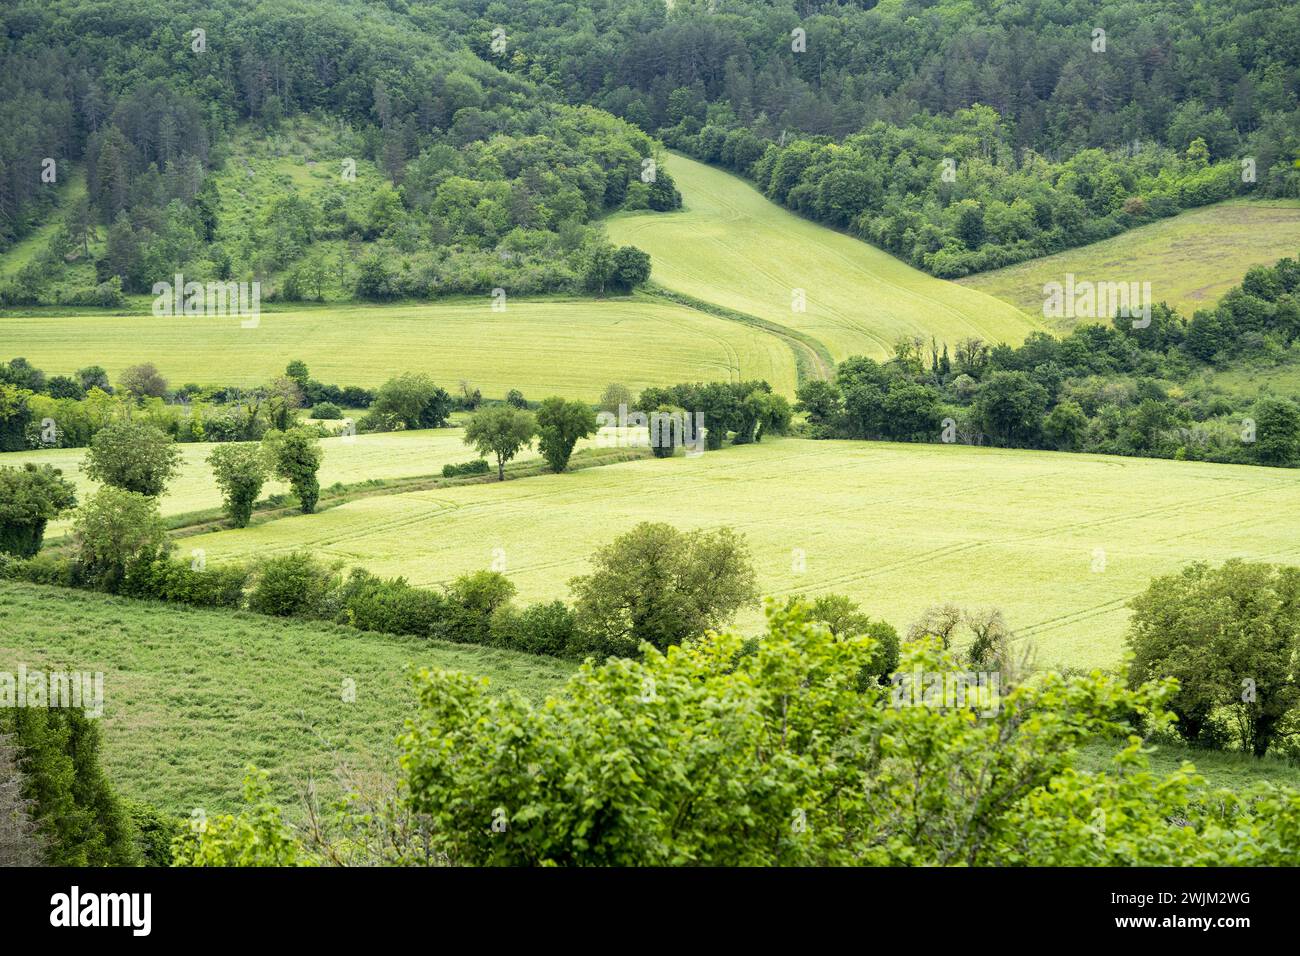 Cultivated fields in a mountainous area Stock Photo